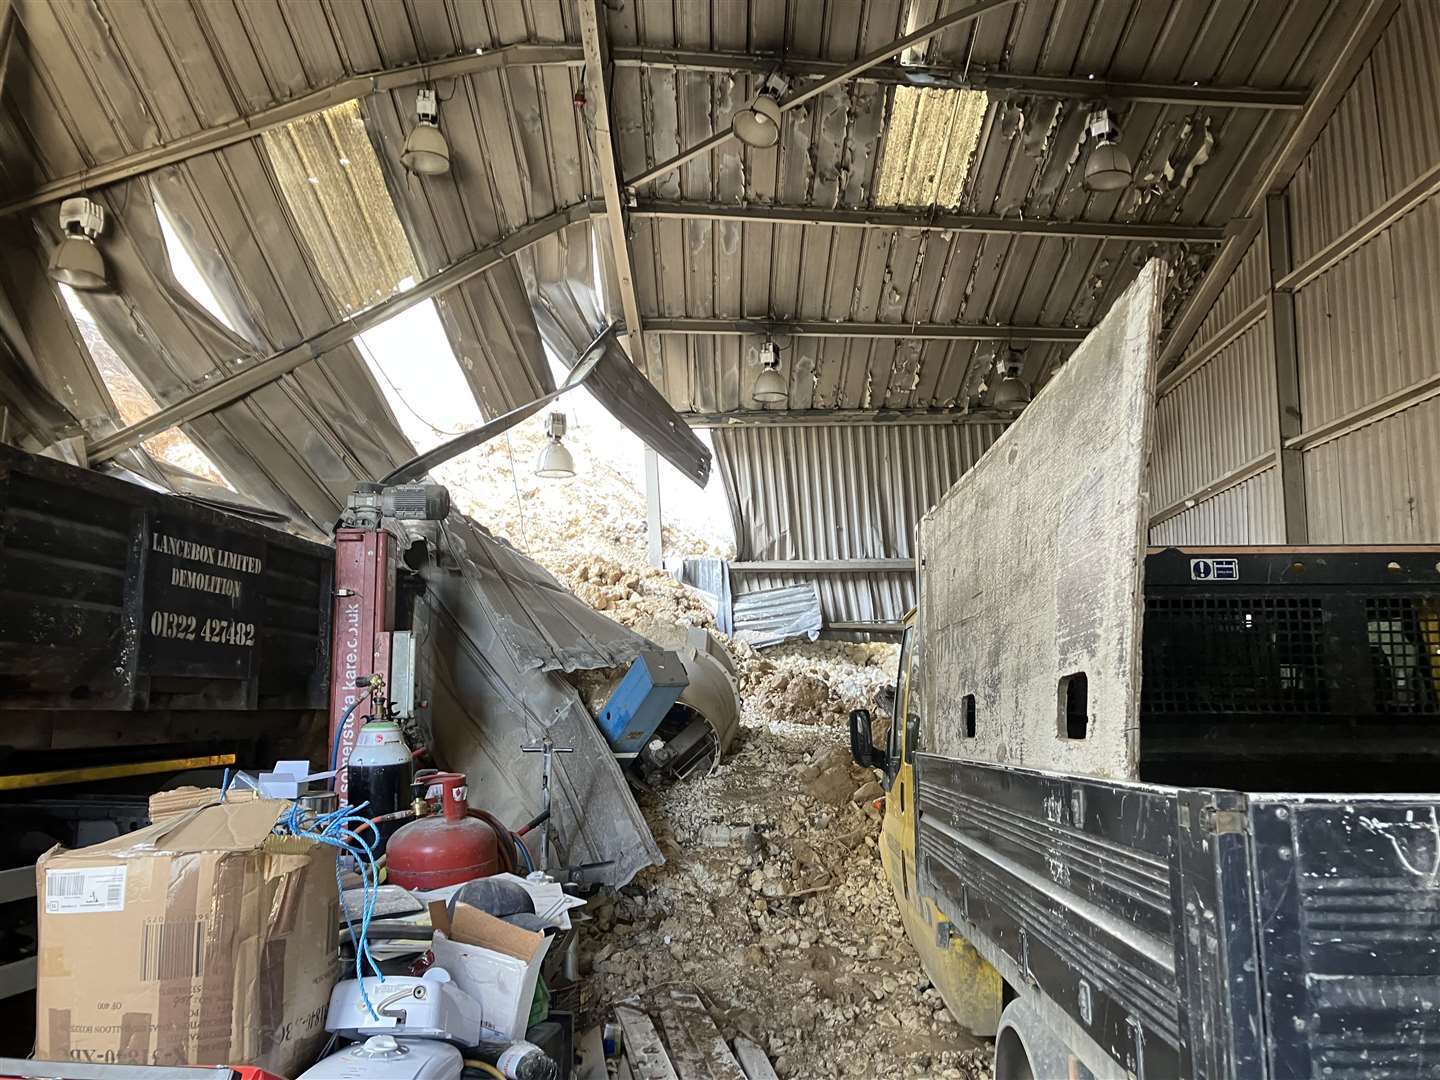 The cliff collapse sent tons of rubble into Lancebox's warehouse